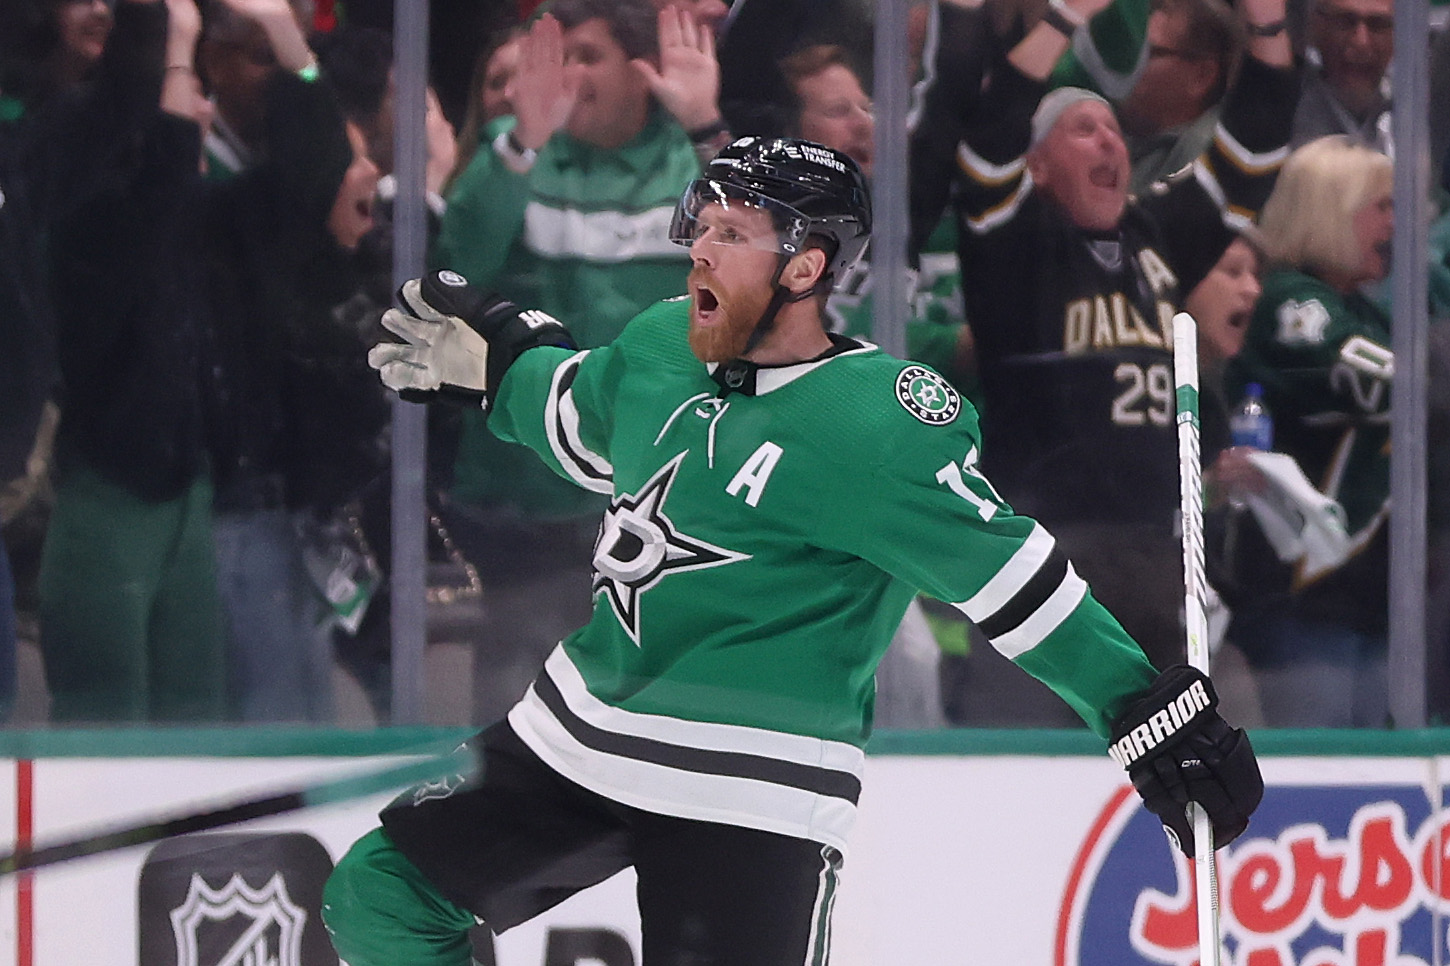 DALLAS, TEXAS - MAY 25: Joe Pavelski #16 of the Dallas Stars celebrates a game-winning power play goal against the Vegas Golden Knights during overtime in Game Four of the Western Conference Final of the 2023 Stanley Cup Playoffs at American Airlines Center on May 25, 2023 in Dallas, Texas. (Photo by Steph Chambers/Getty Images)